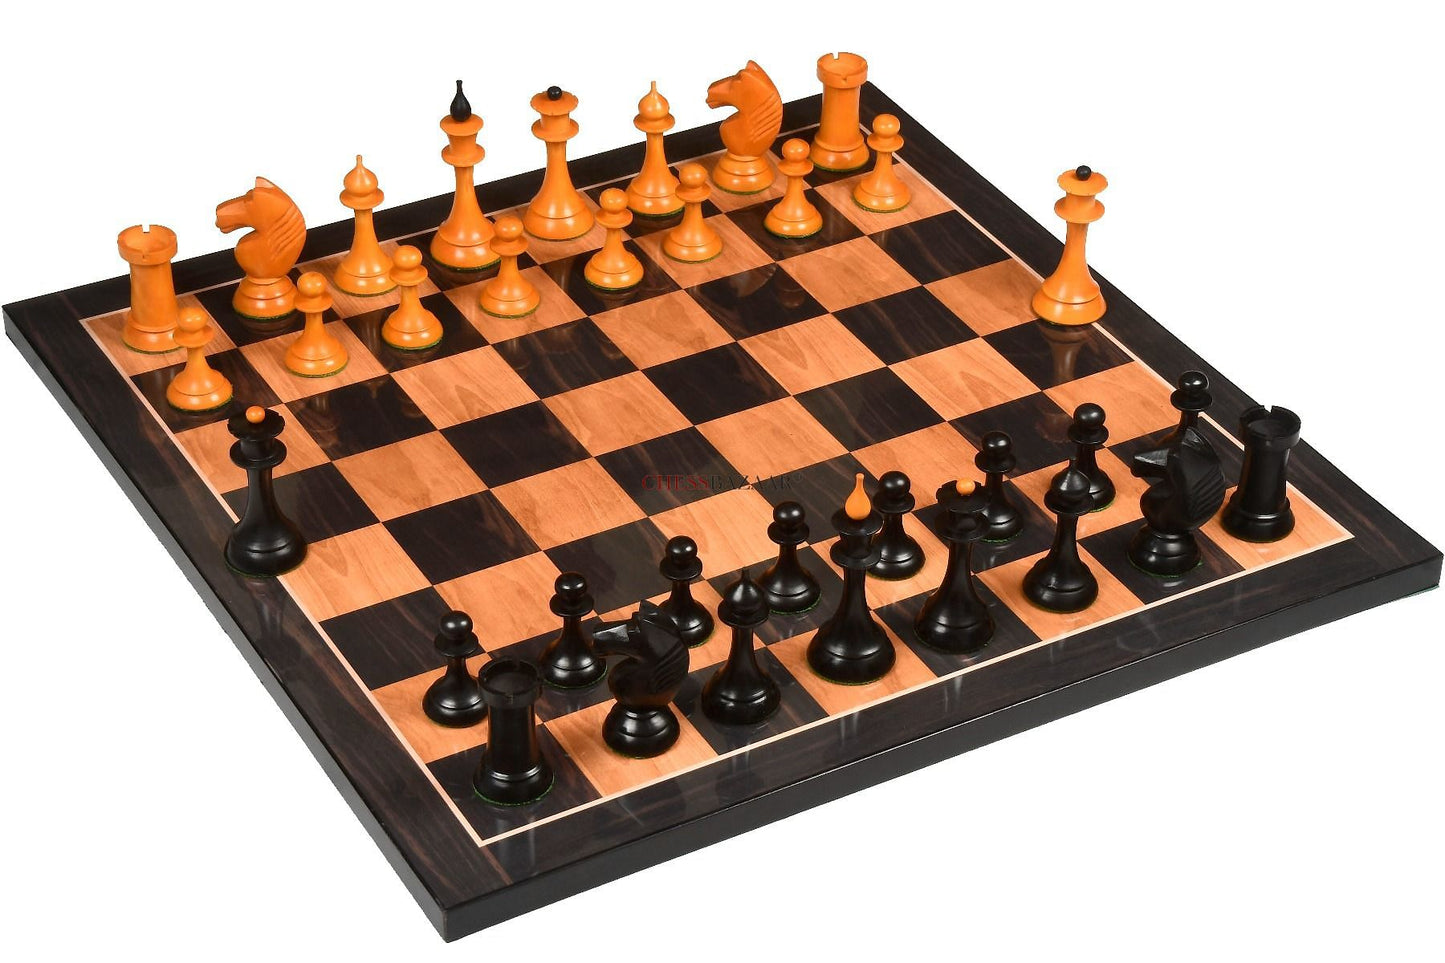 The 1950s Soviet (Russian) Latvian Reproduced Chess Pieces in Ebonized Boxwood / Antiqued Boxwood - 4.1" King